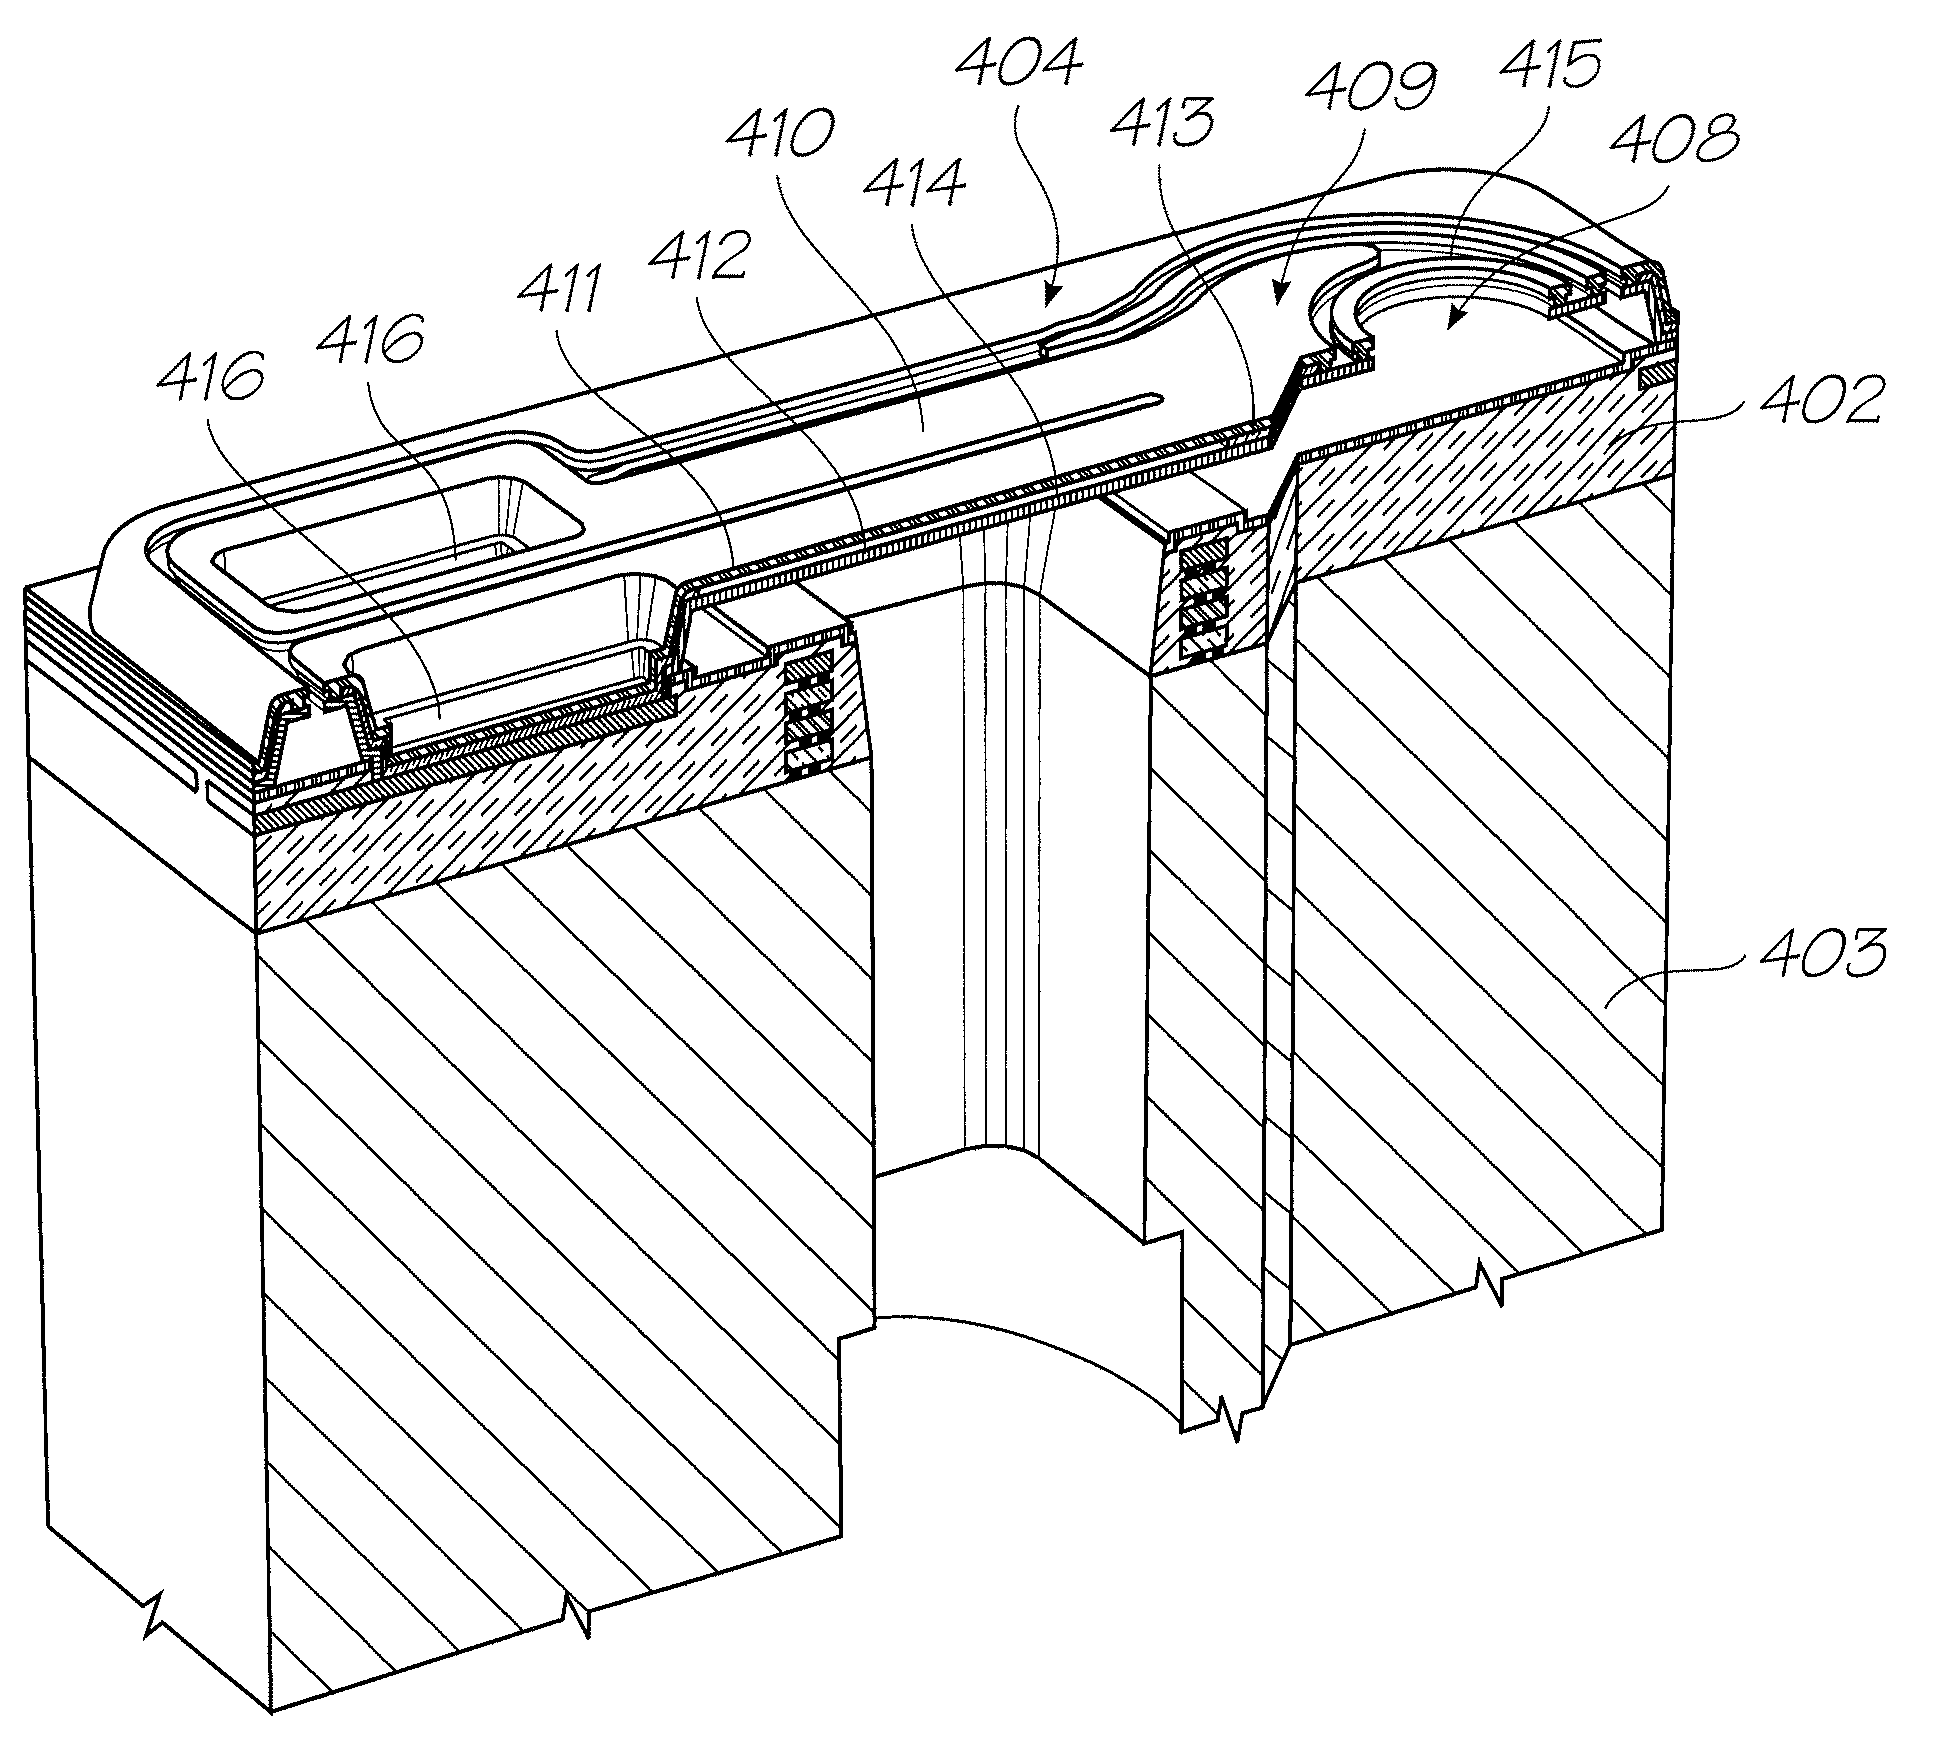 Printhead having moving roof structure and mechanical seal